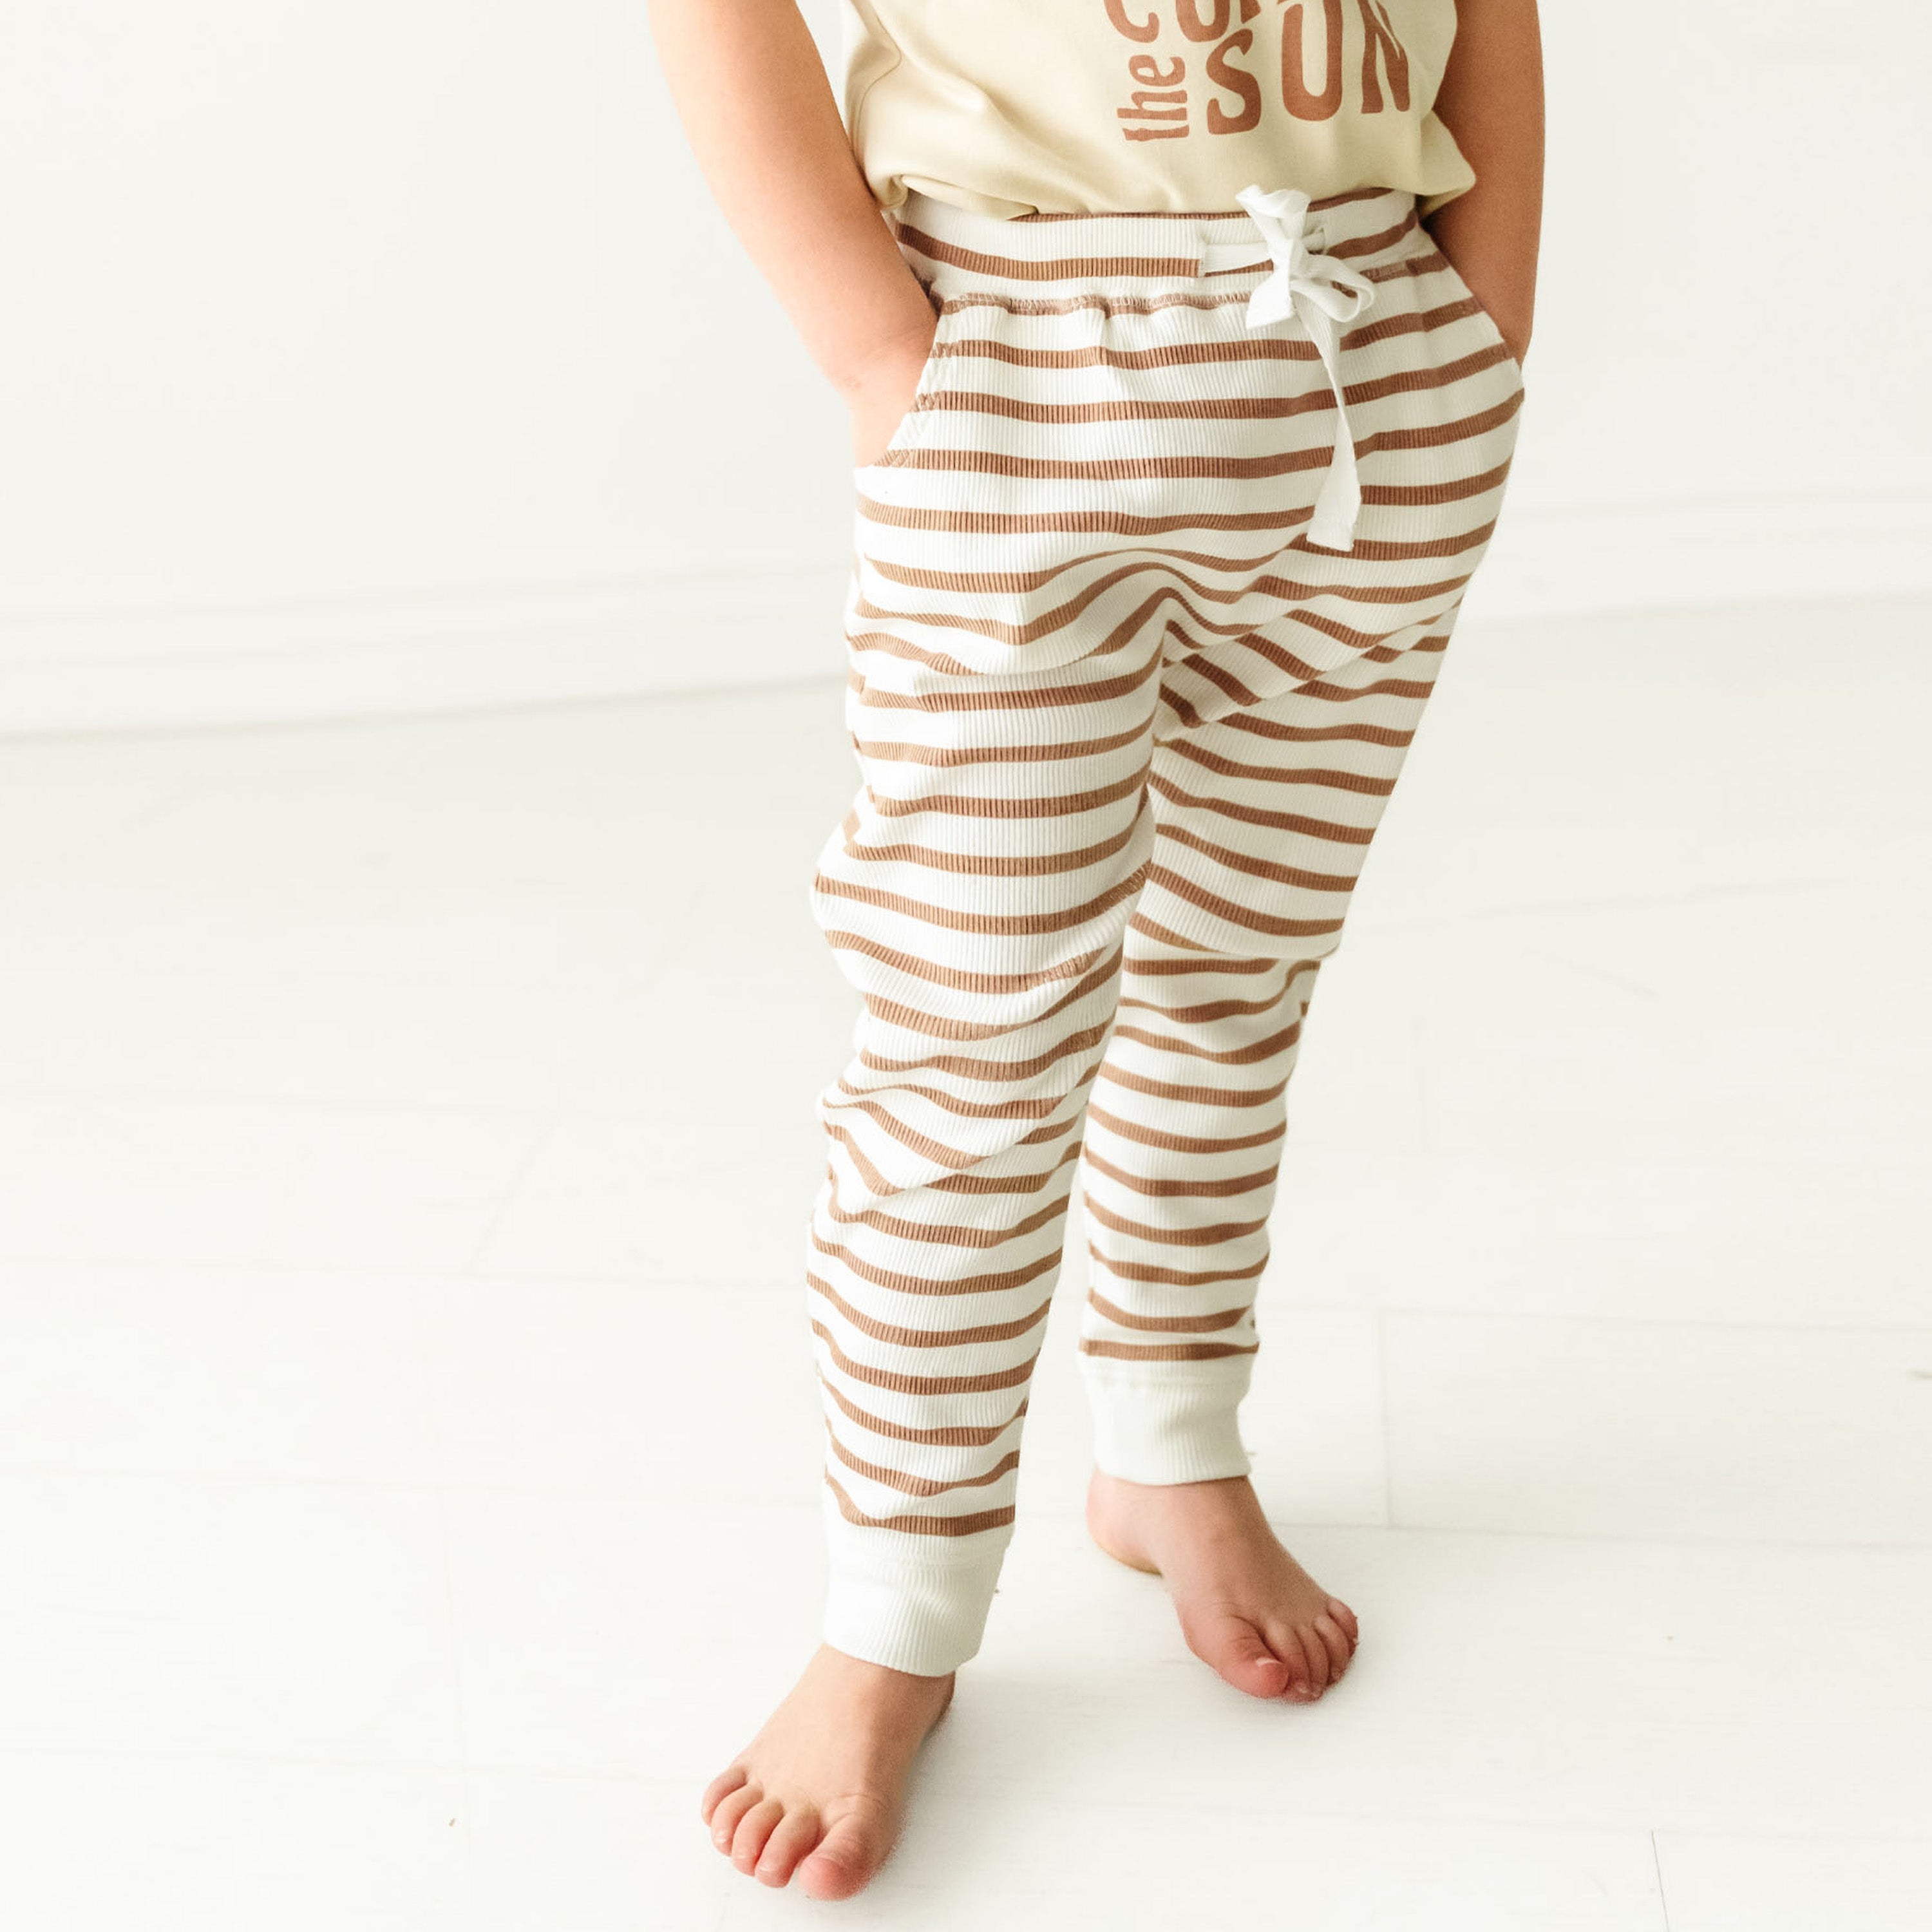 A baby in Makemake Organics' Organic Harem Pants - Stripes stands barefoot on a white floor, with only the lower half of their body visible in the image.